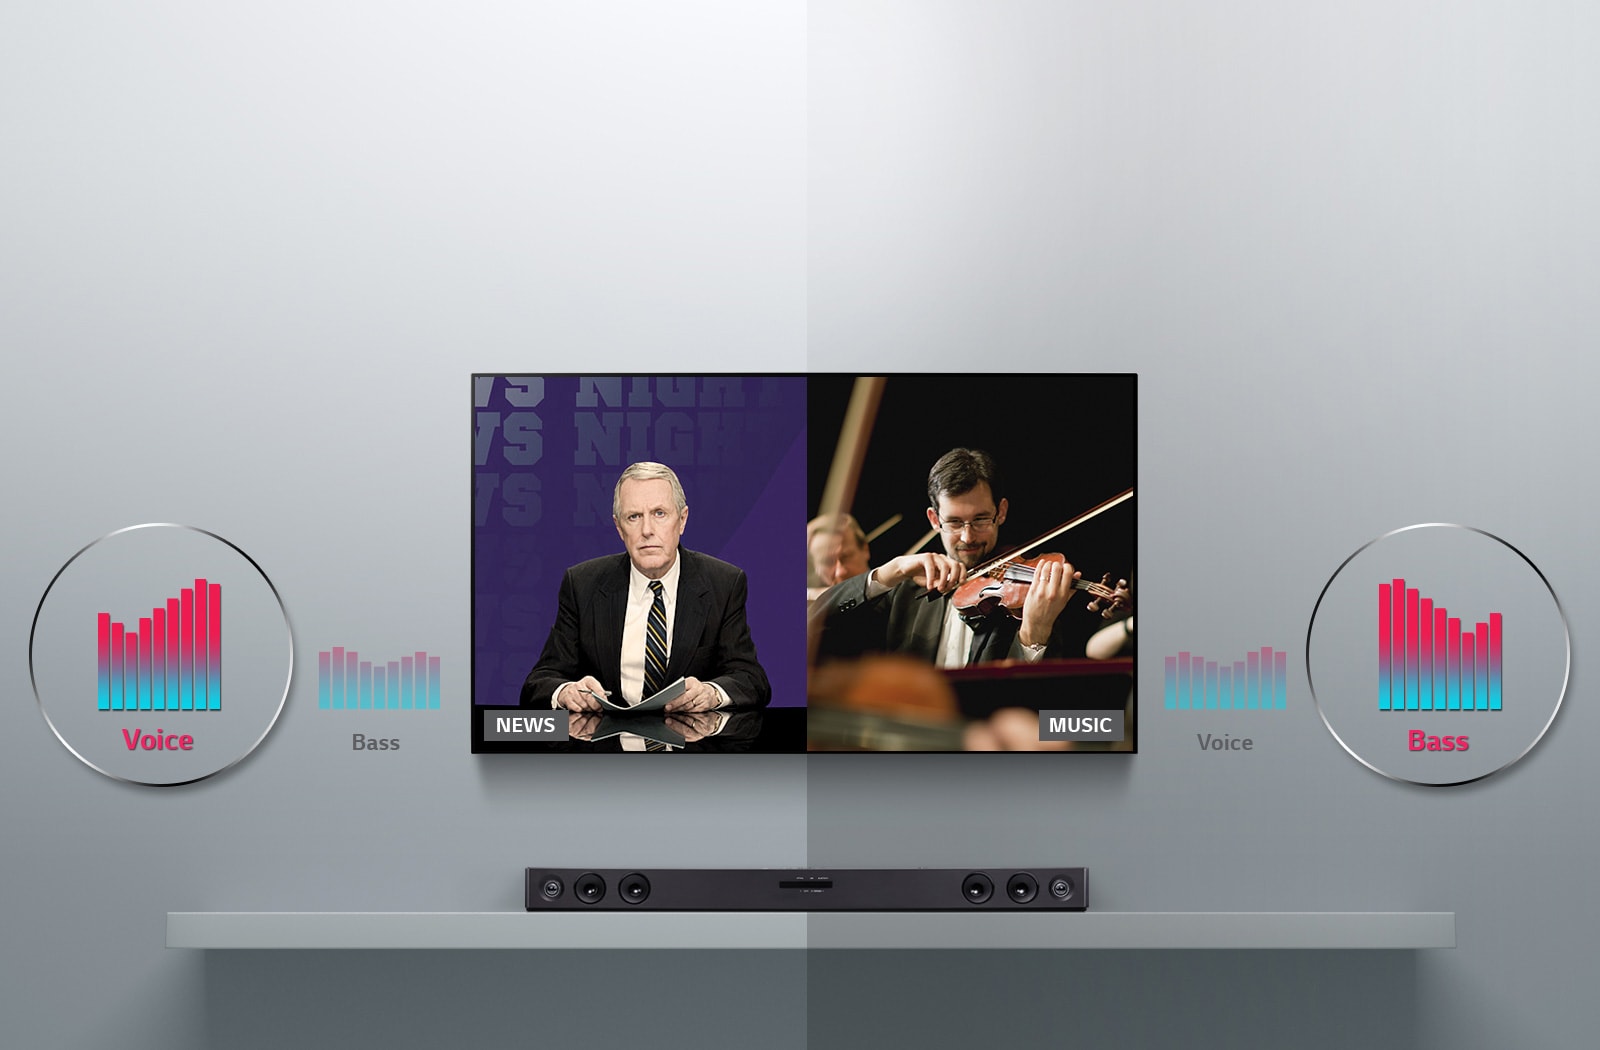 LG TV is hung on the wall, and LG Sound Bar SQC2 is placed on the grey table. The image is divided in half. On the left, LG TV shows a NEWS scene and the voice pictogram. On the right, LG TV displays a classical music concert and the bass pictogram on the right.